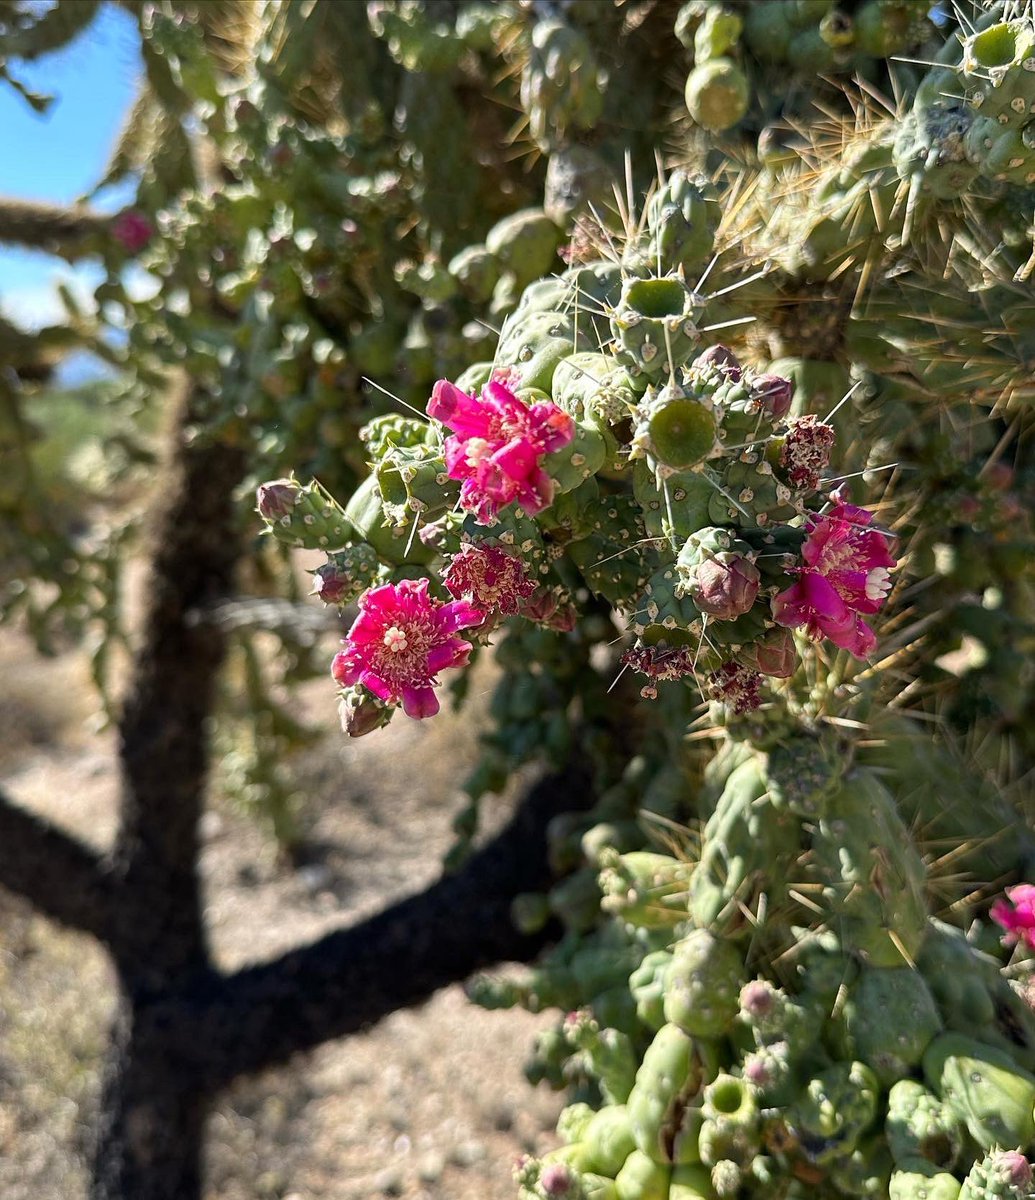 Happy Sunday, #Tucson! 100 and partly cloudy today. #Hiking in cool 70’s early this morning I noticed the tiniest, yet among the most stunning, buds and blooms on what I think are cholla plants. Happy trails finding sweet details of our ever-gifting desertscape in Tucson.